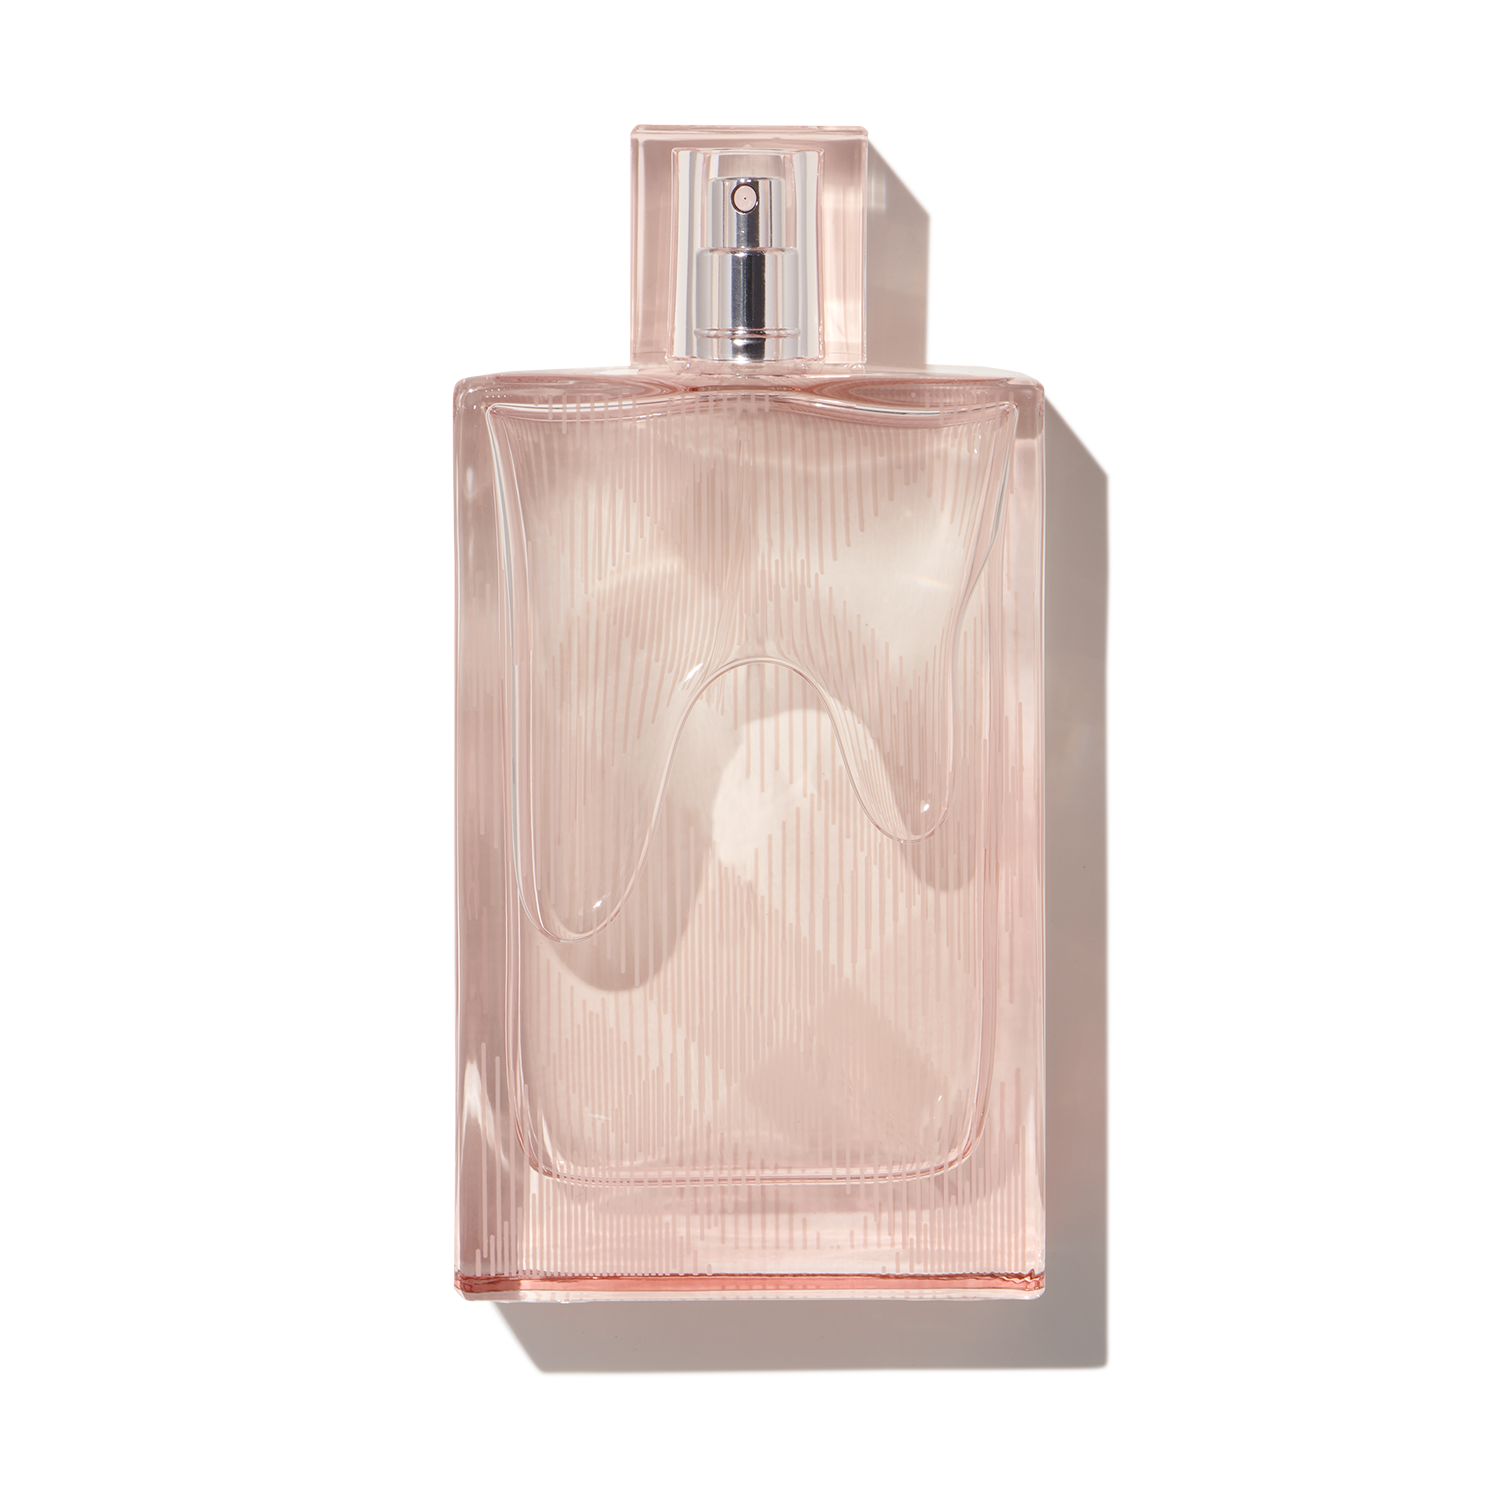 Get Burberry Brit Sheer for $16.95 at Scentbird